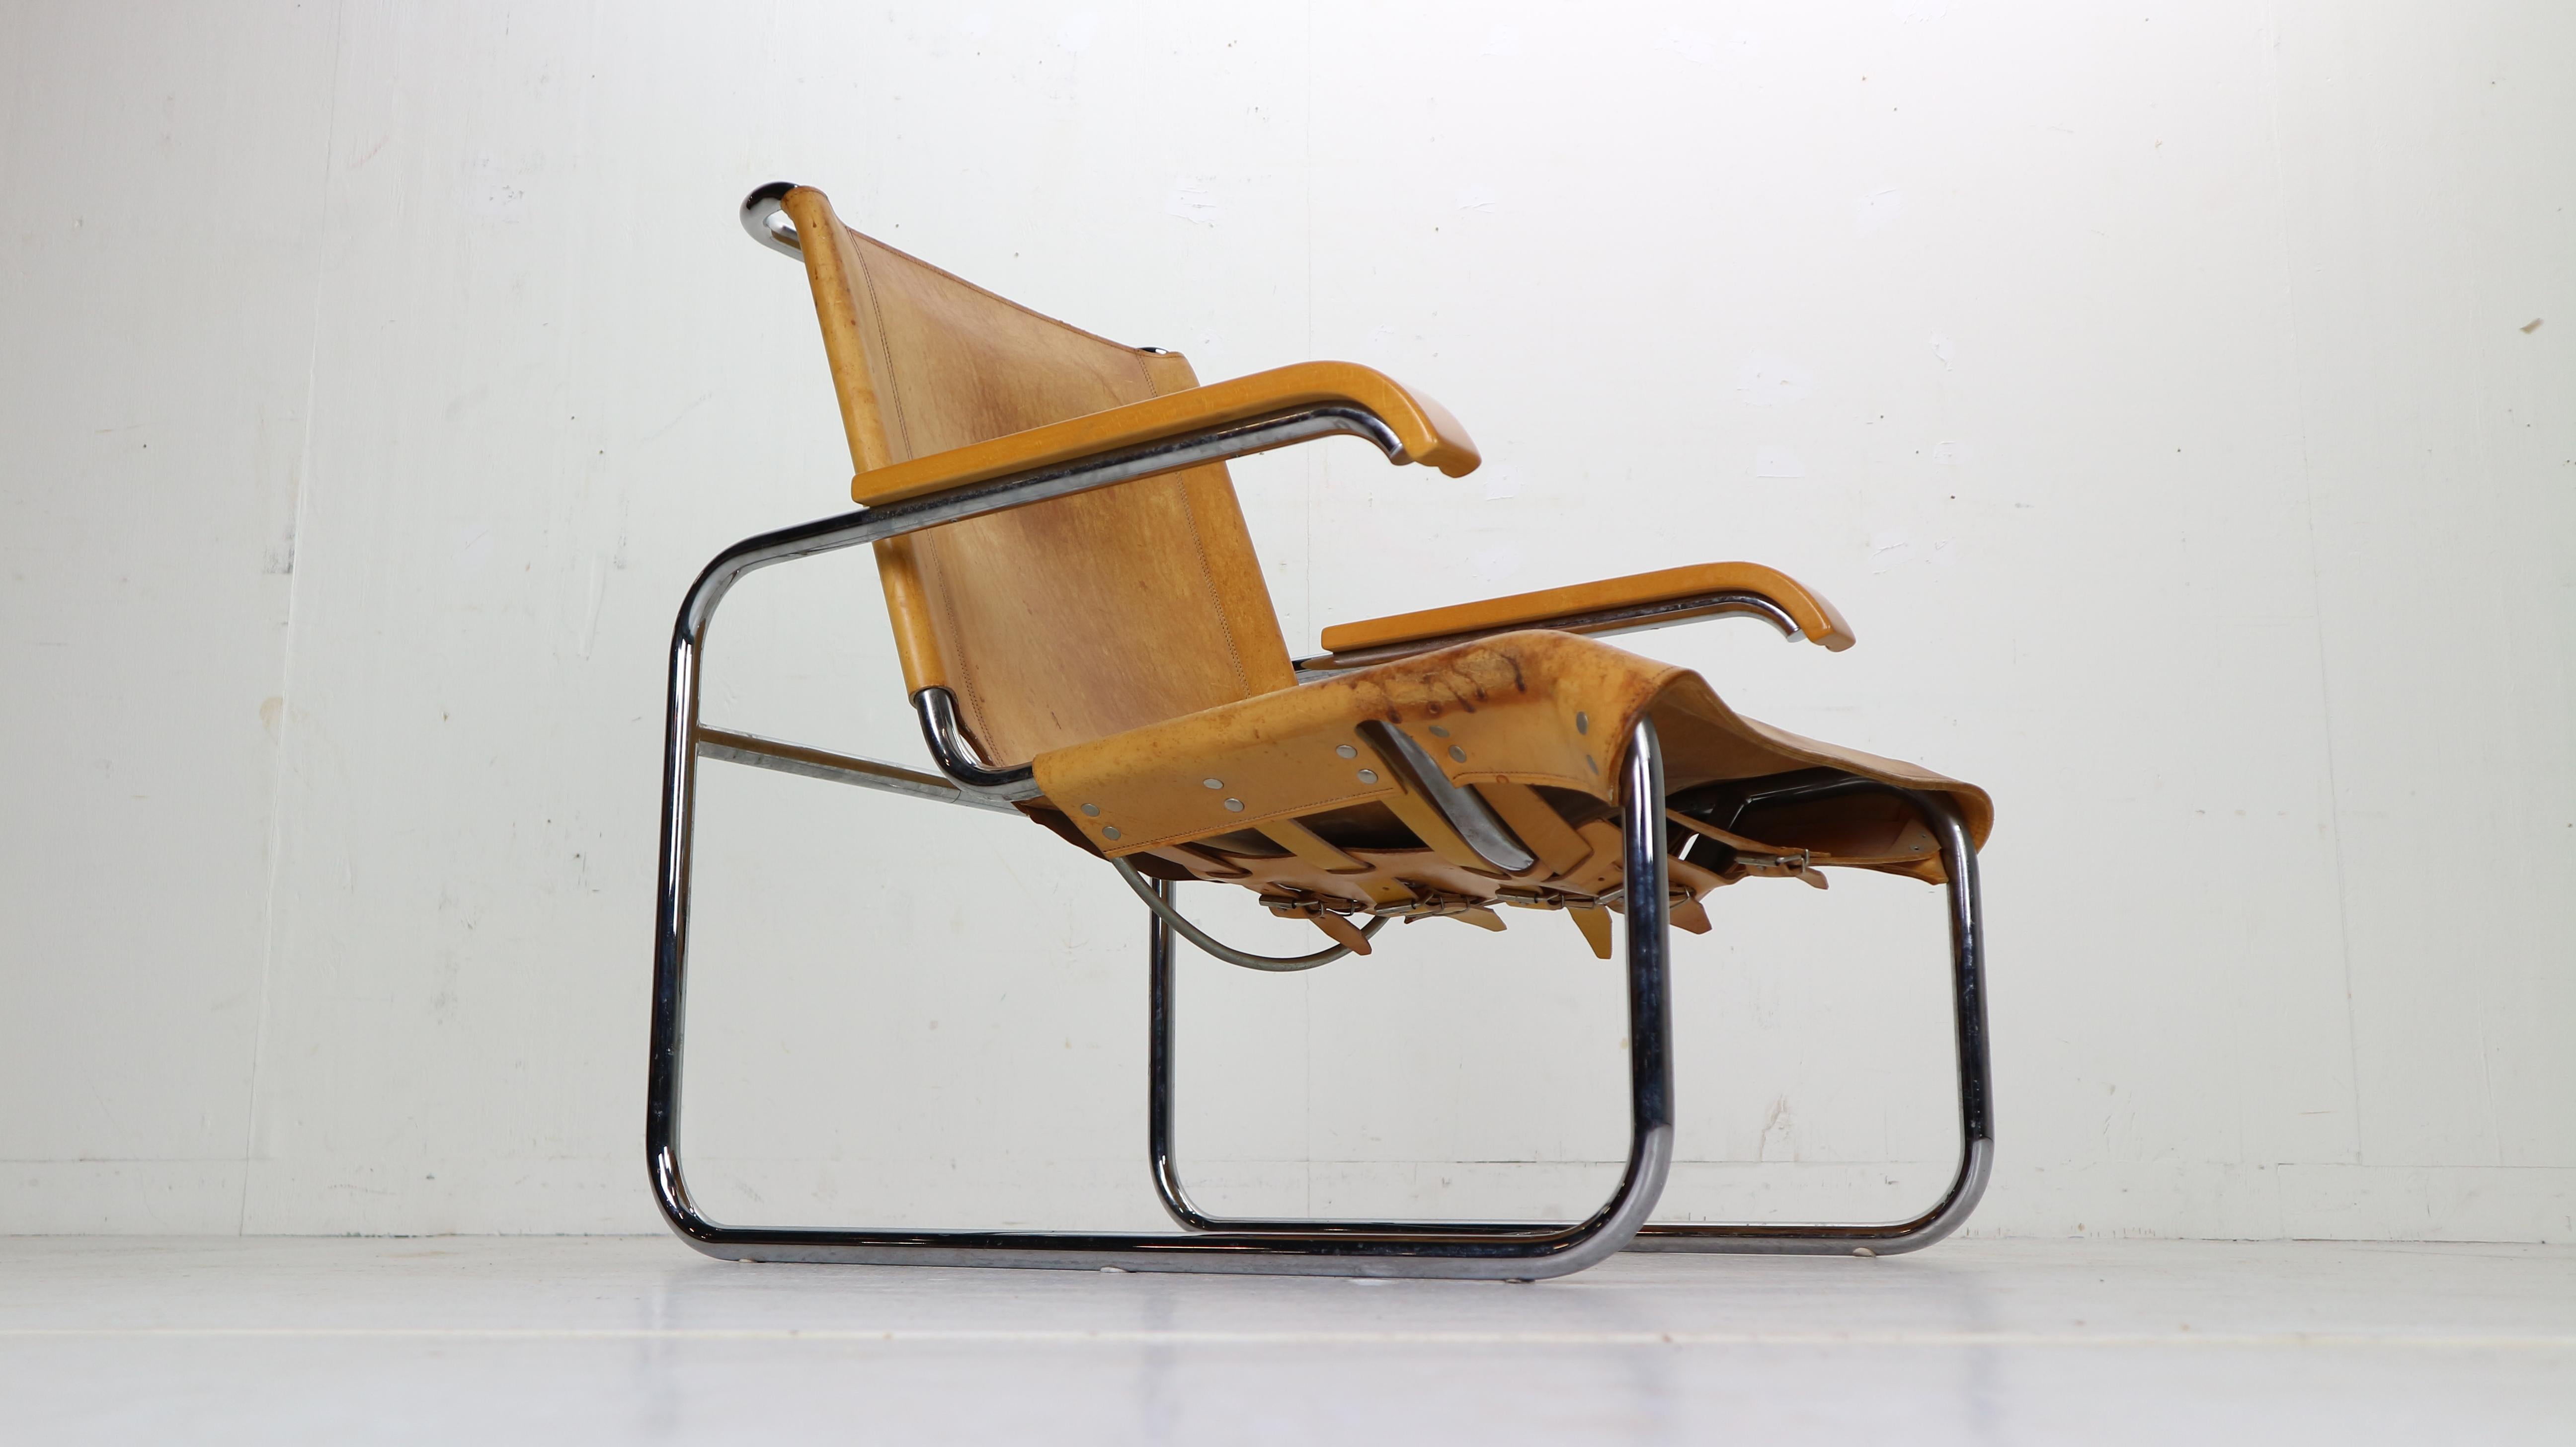 Lounge chair designed by Marcel Breuer in 1930s and manufactured by Thonet, Germany (marked in the leather seat) and frame).
Model number- B35 (early edition).
Made in tubular steel and upholstered in its original leather with its great vintage